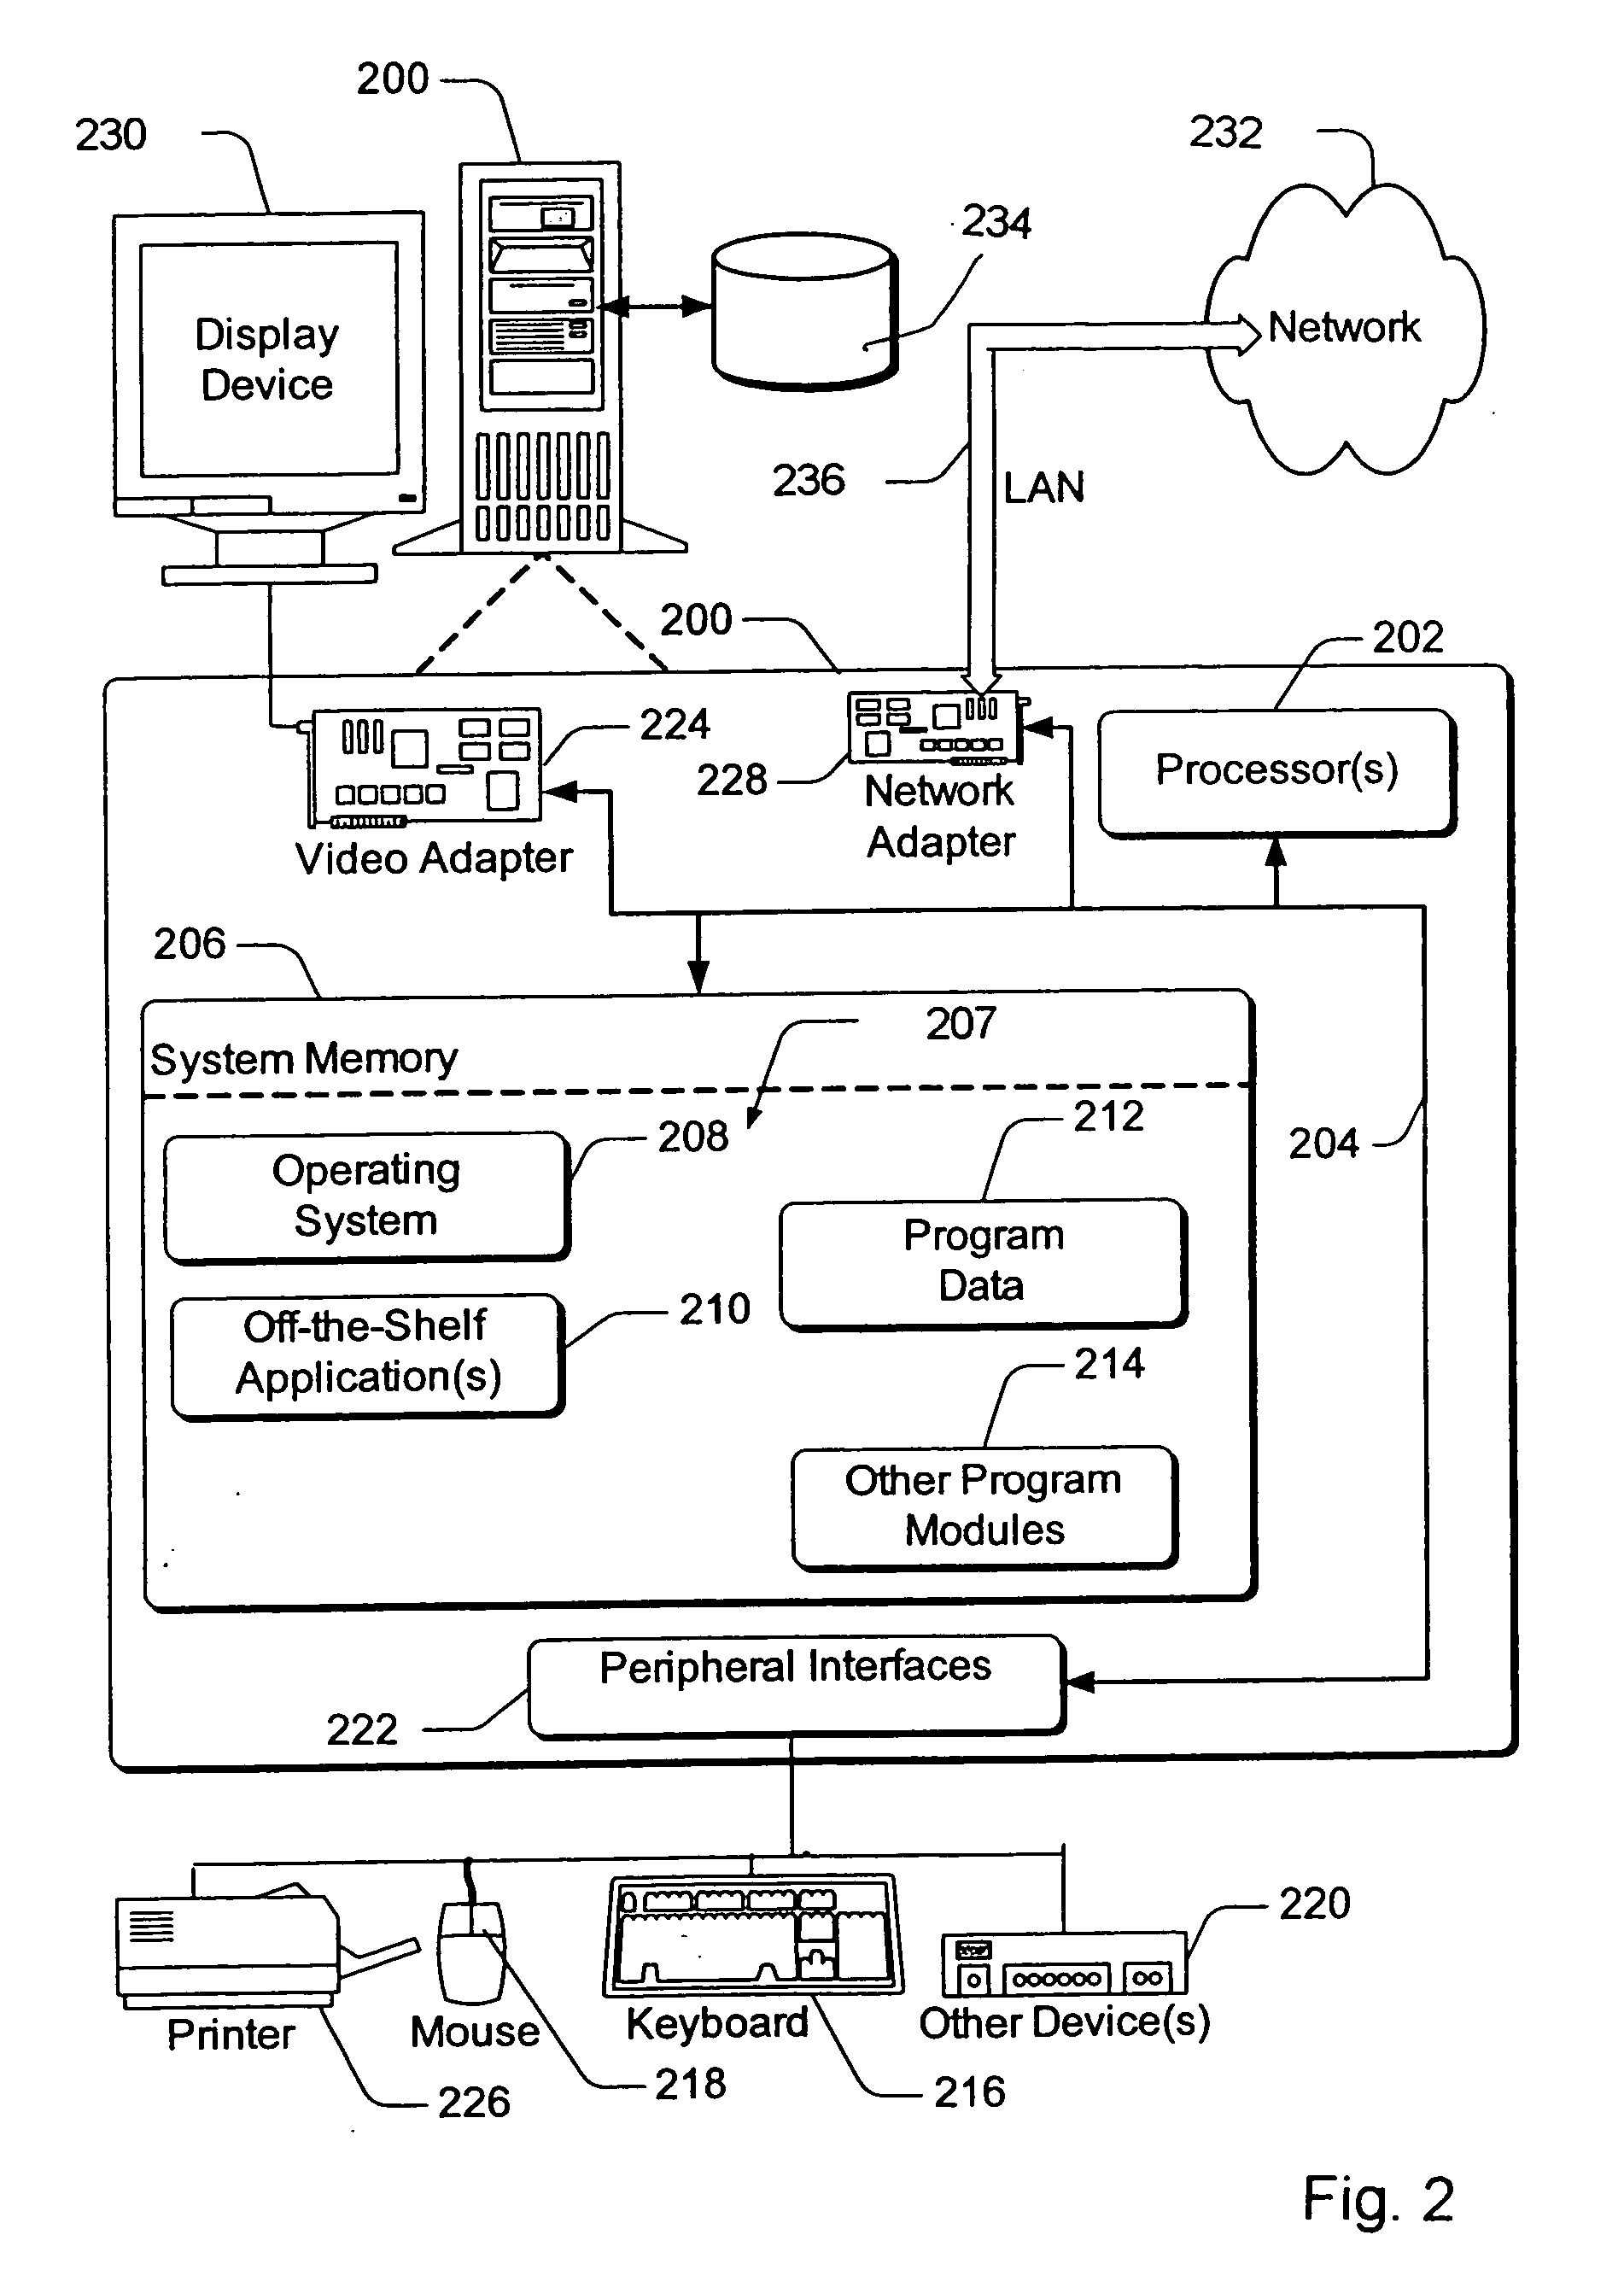 Method and apparatus for securely displaying and communicating trusted and untrusted internet content